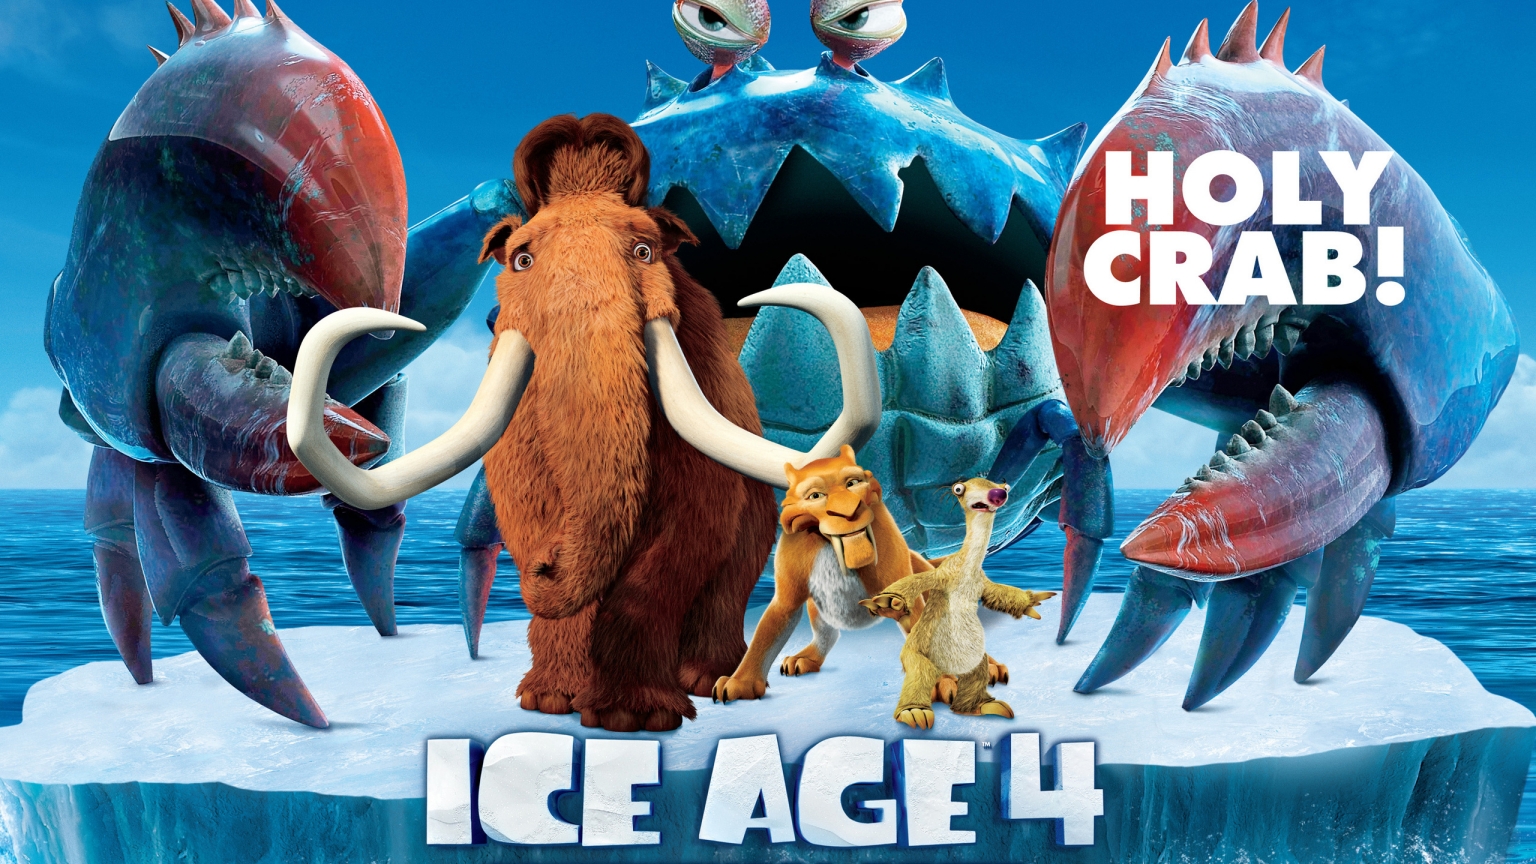 Ice Age 4 Holy Crab for 1536 x 864 HDTV resolution